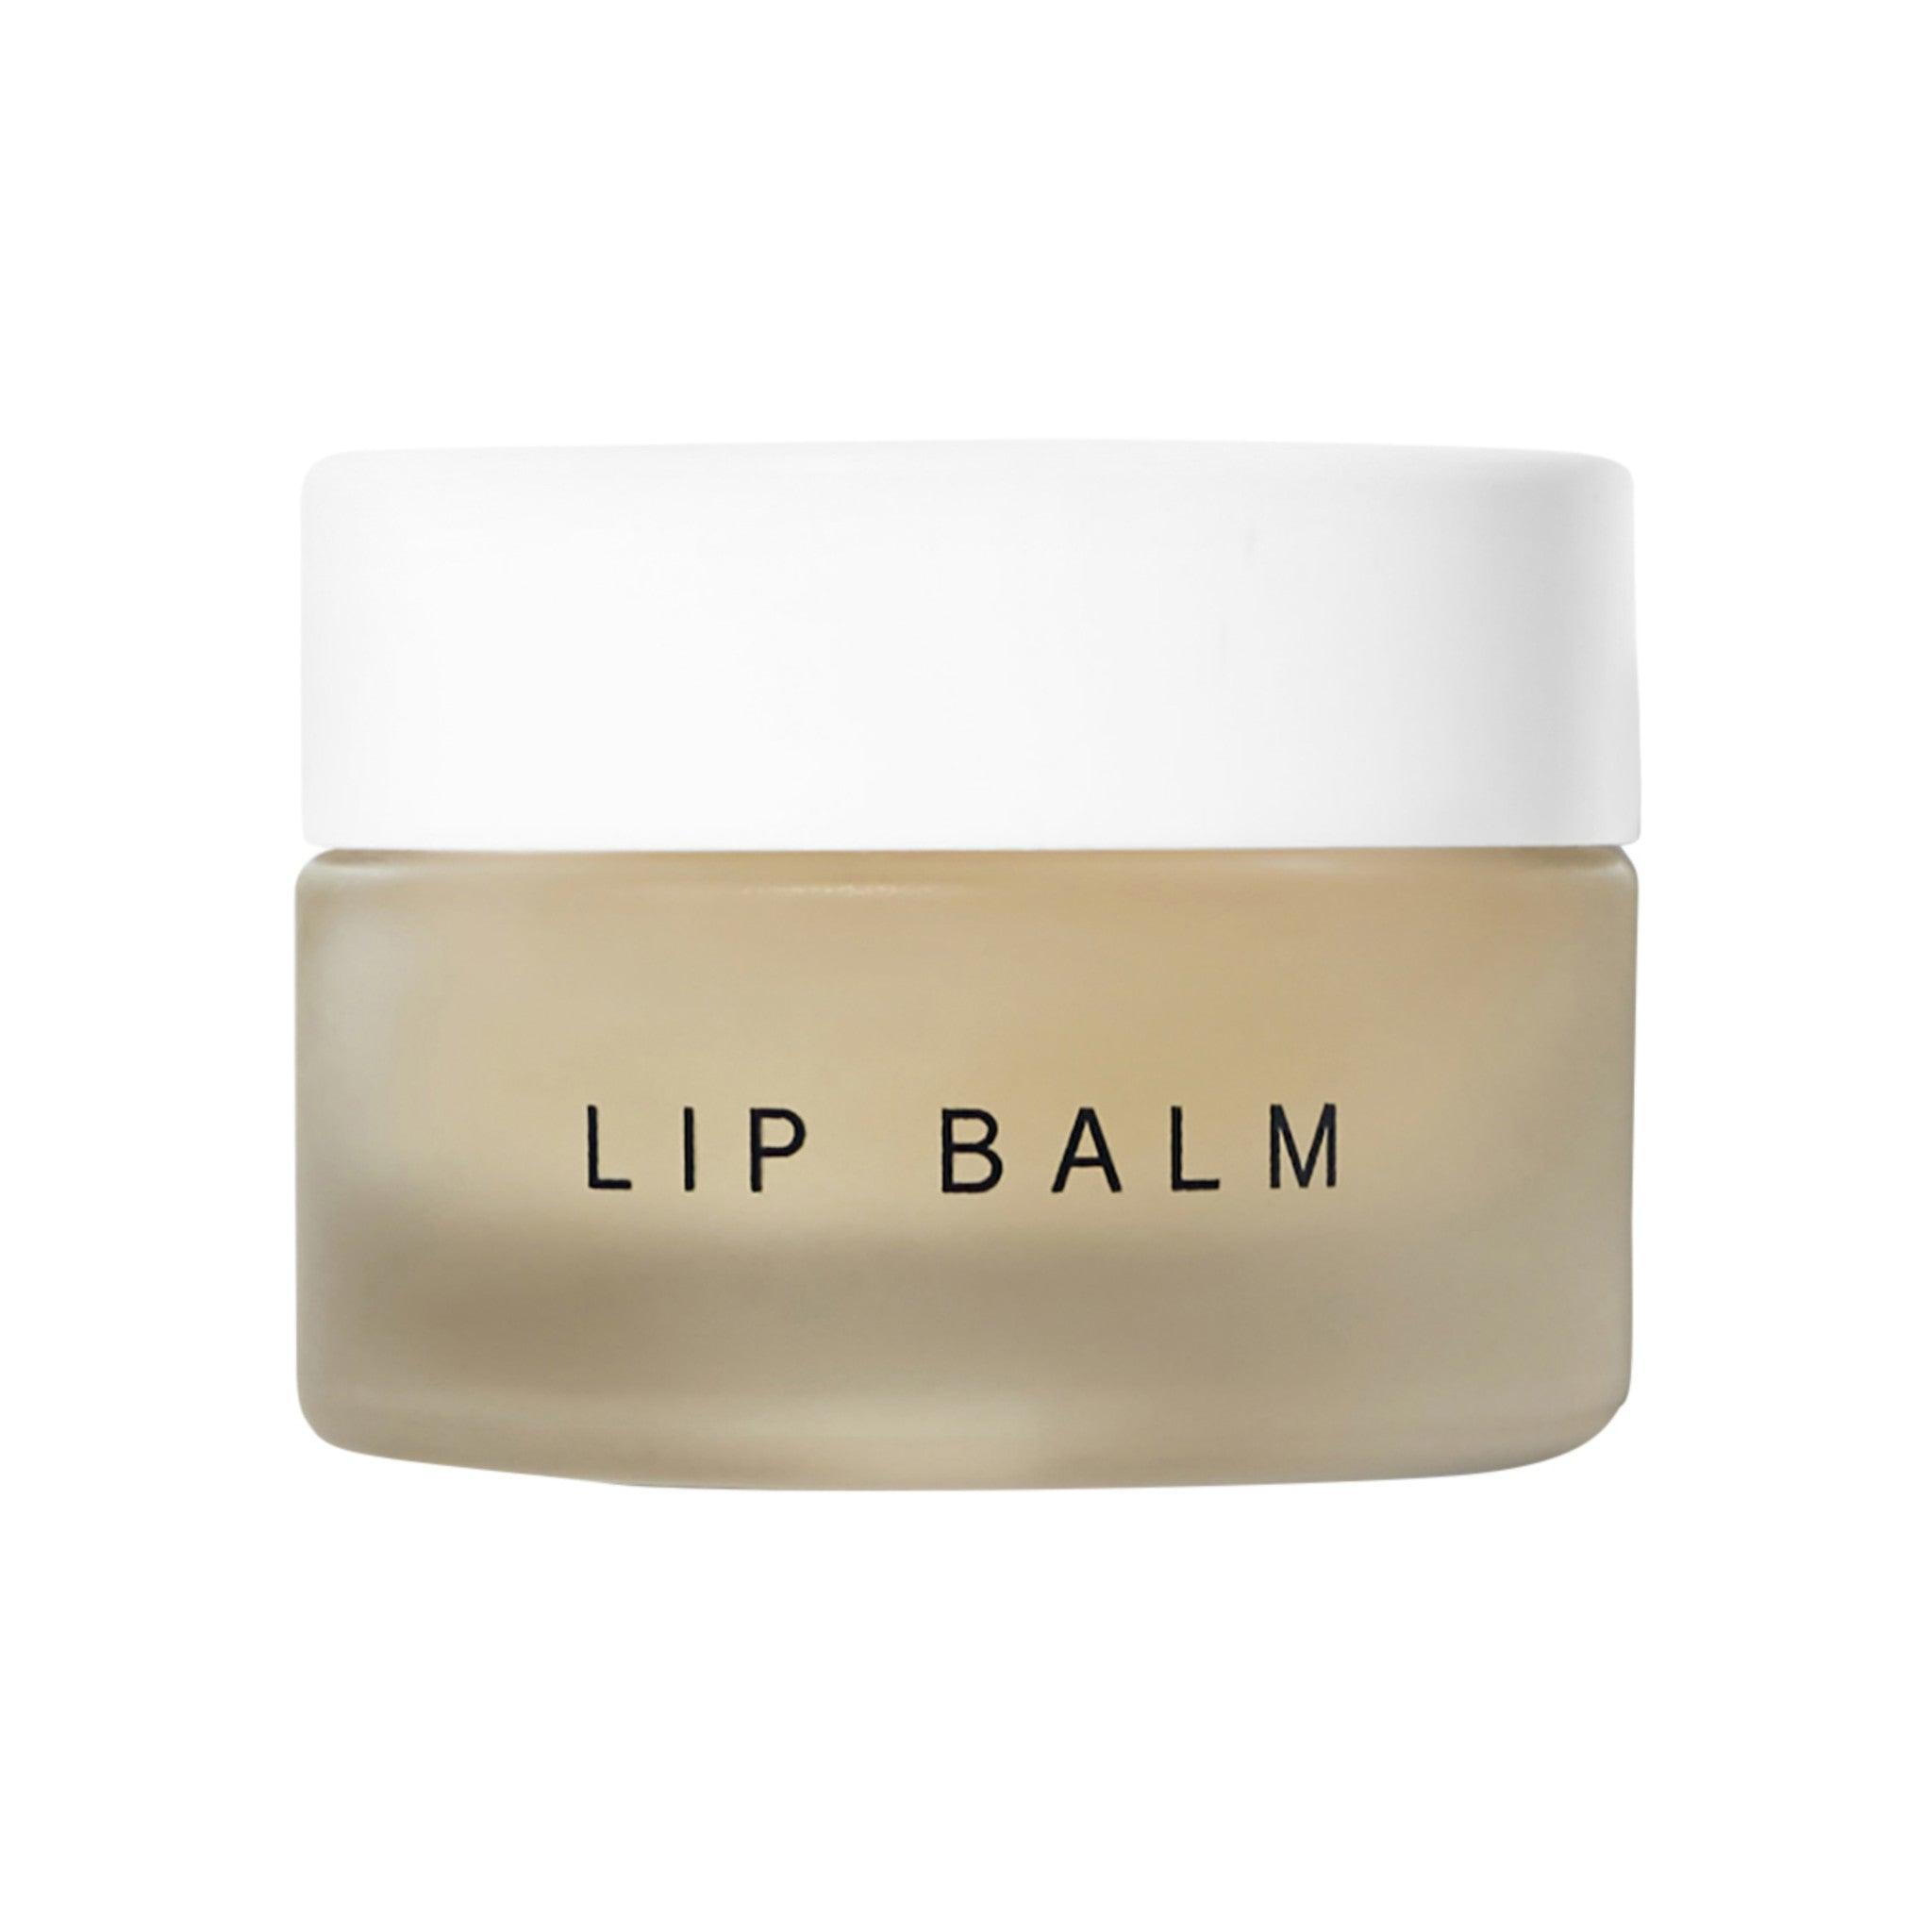 Dr. Barbara Sturm Lip Balm main image. This product is in the color clear